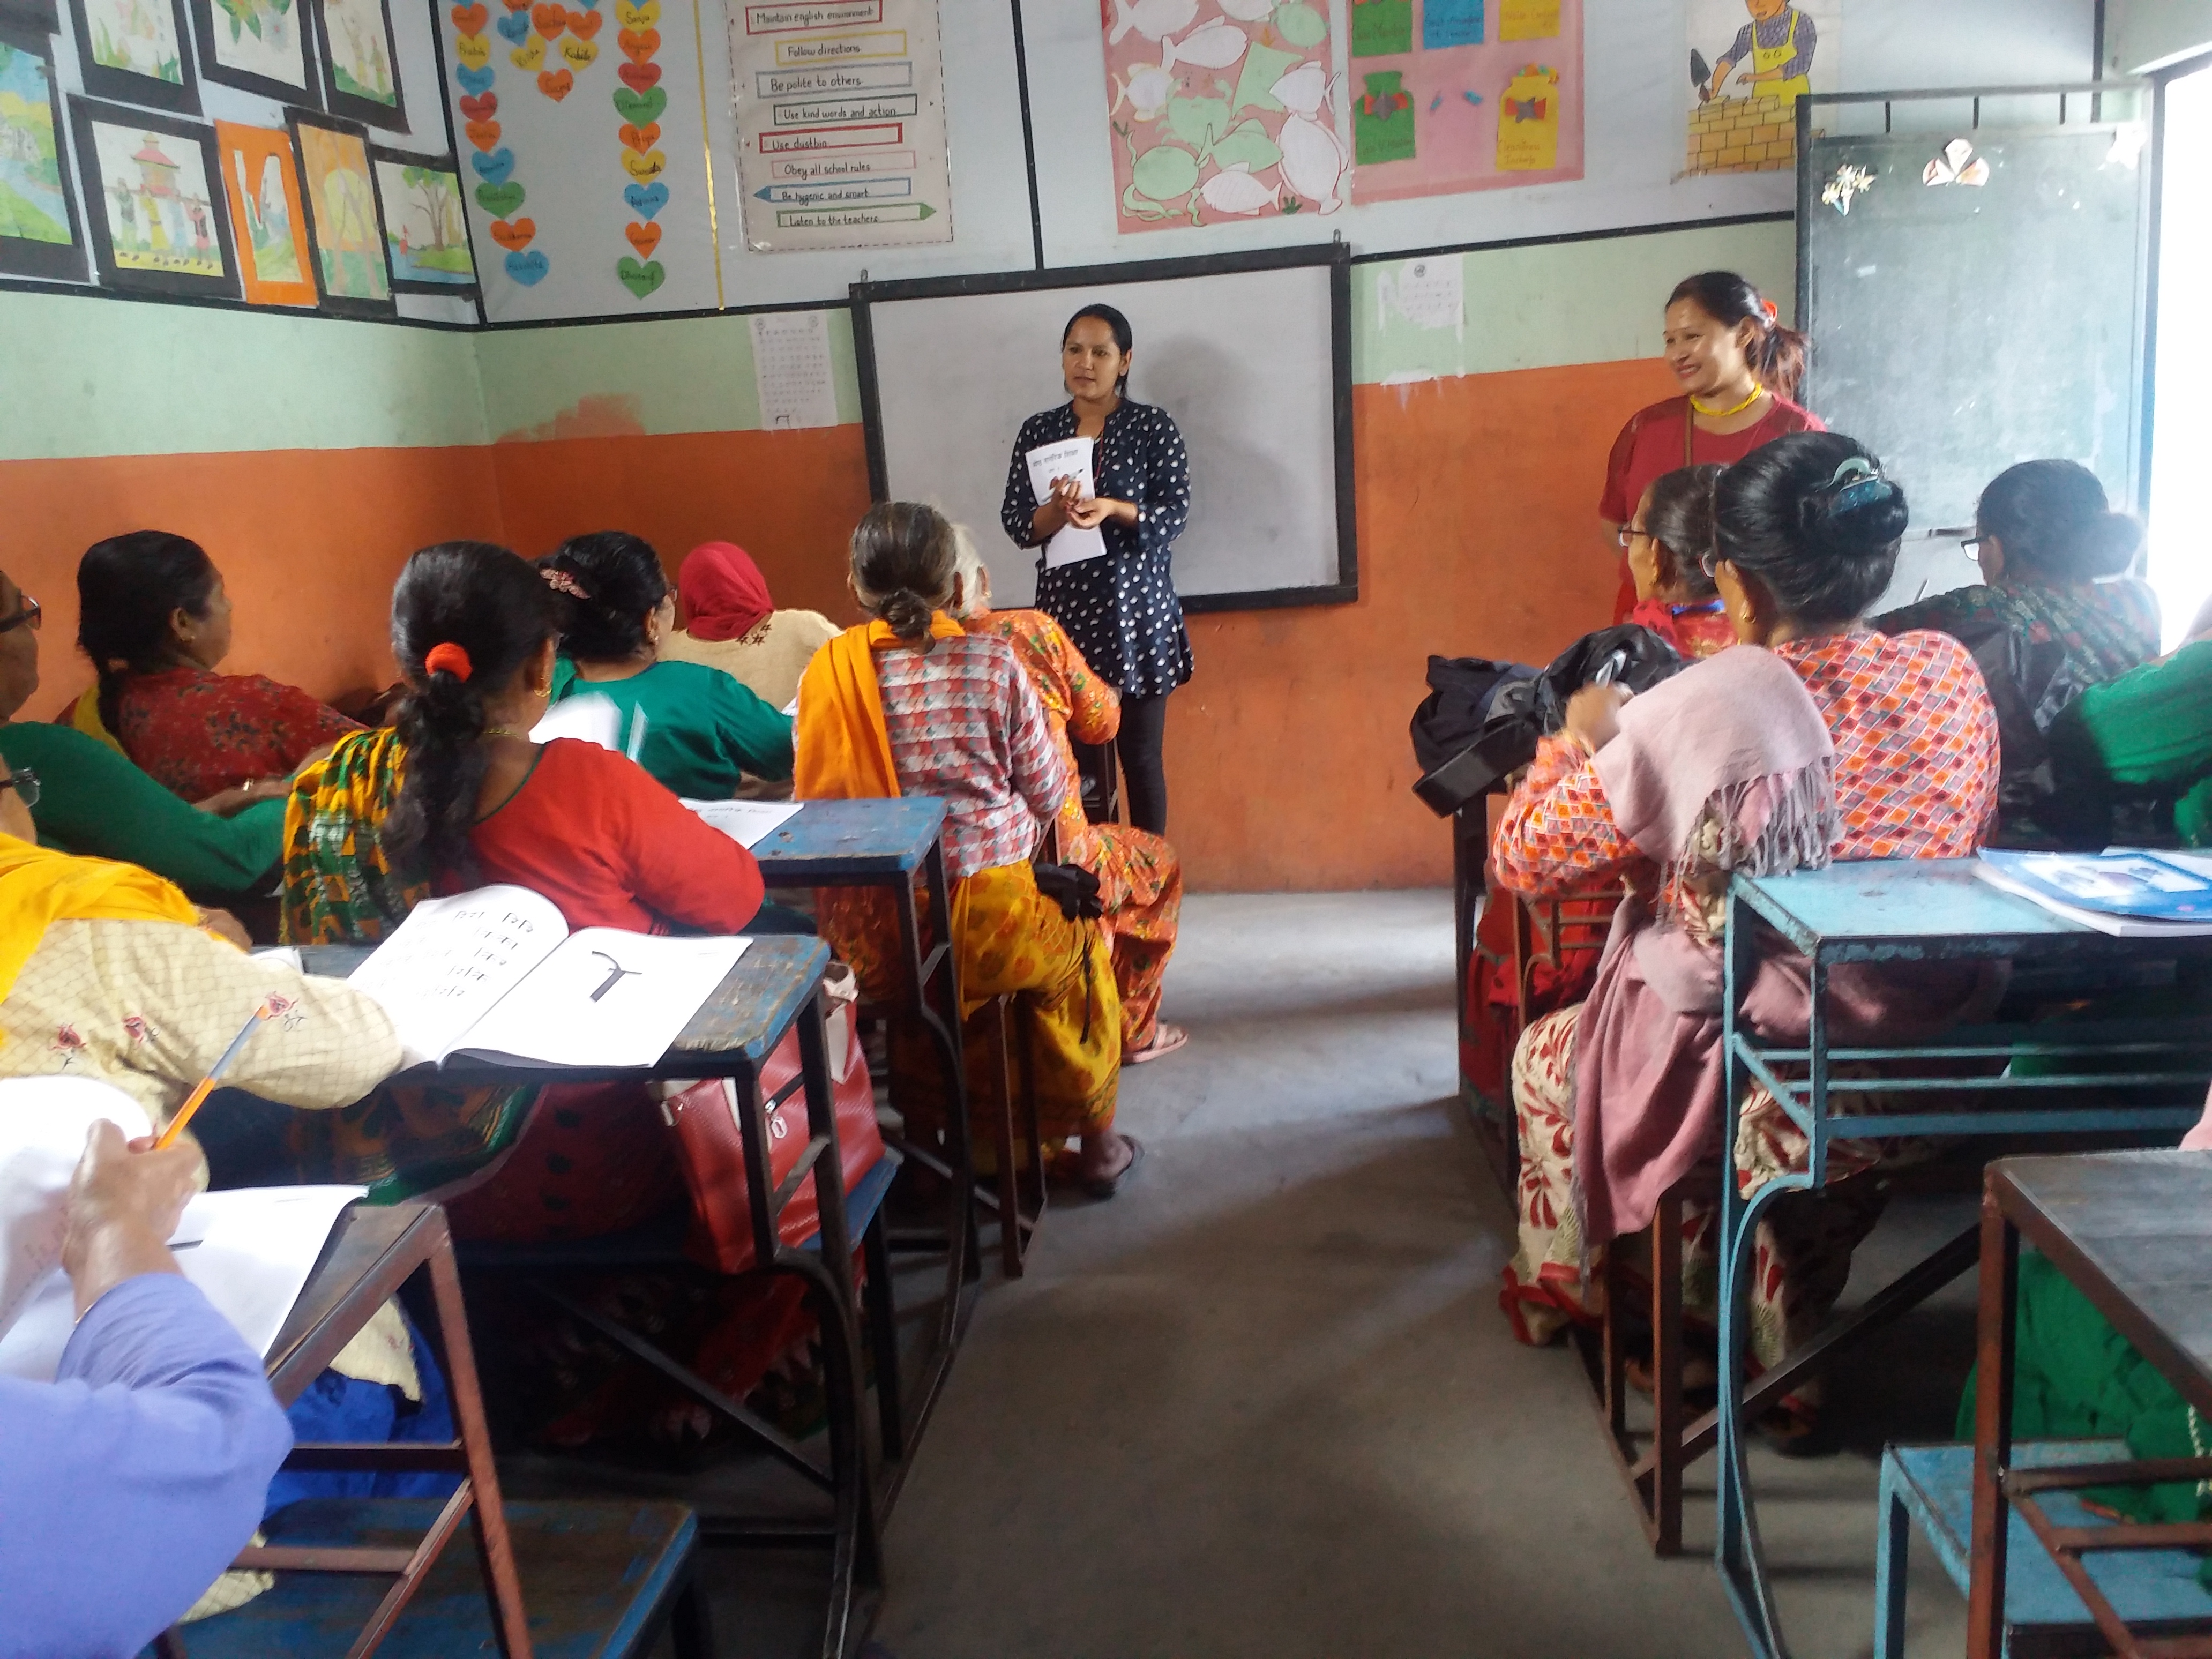 Ageing Nepal piloted the basic literacy class in an urban center of Kathmandu Metropolitan. Ageing Nepal partnered with a local social-organization to targets SDG4 (Quality education) for elderly with the aim of leaving no one behind.